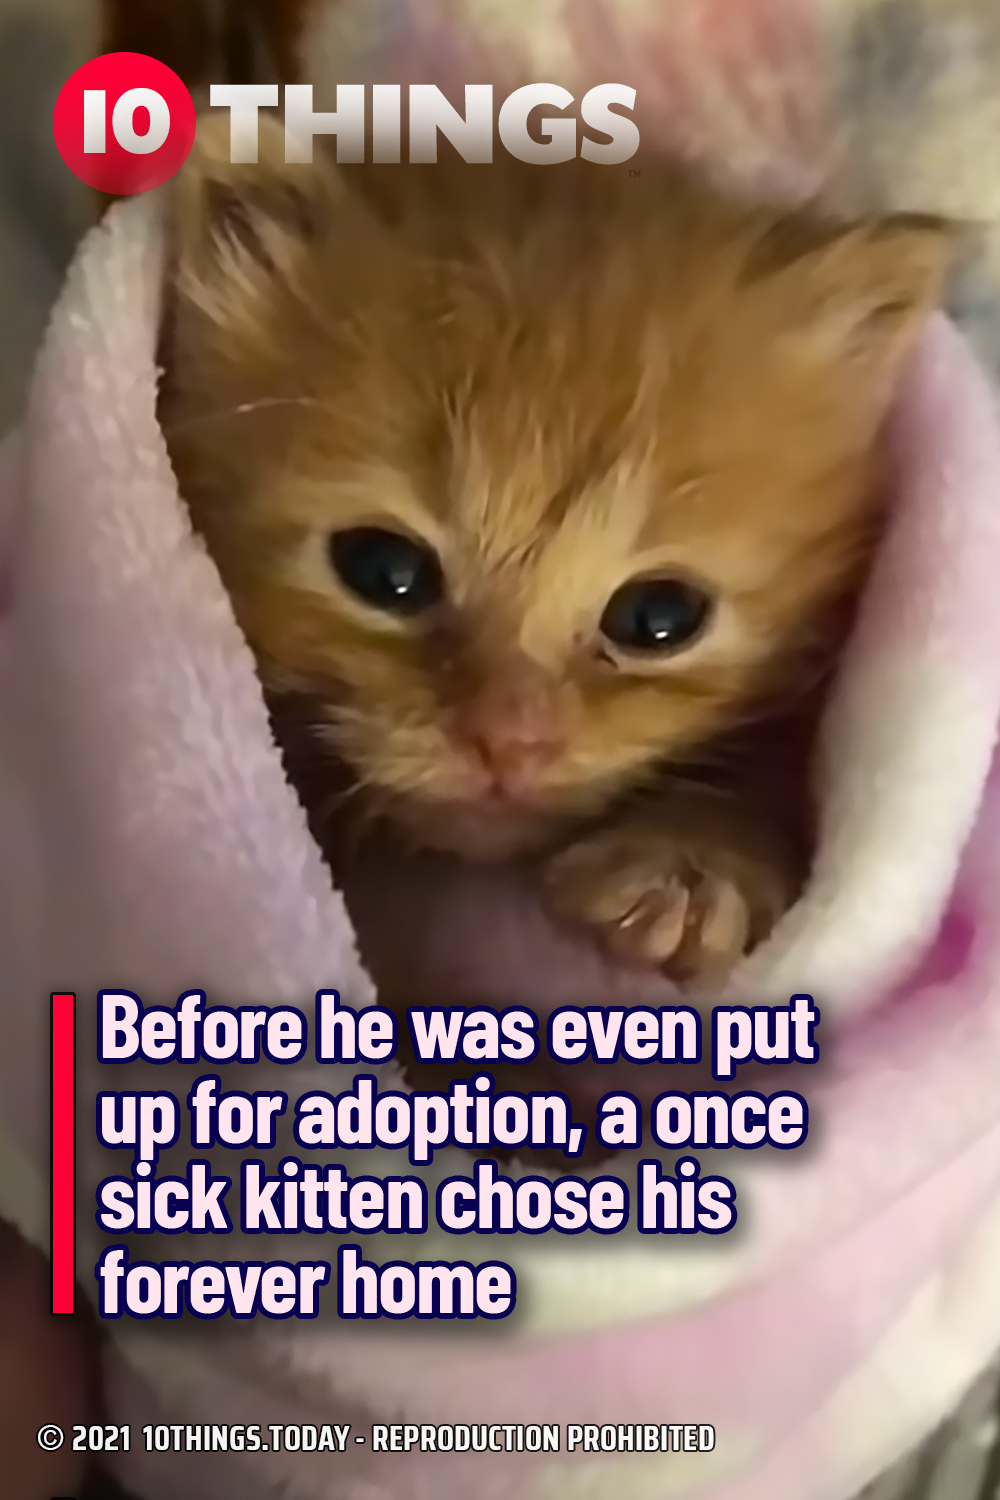 Before he was even put up for adoption, a once sick kitten chose his forever home